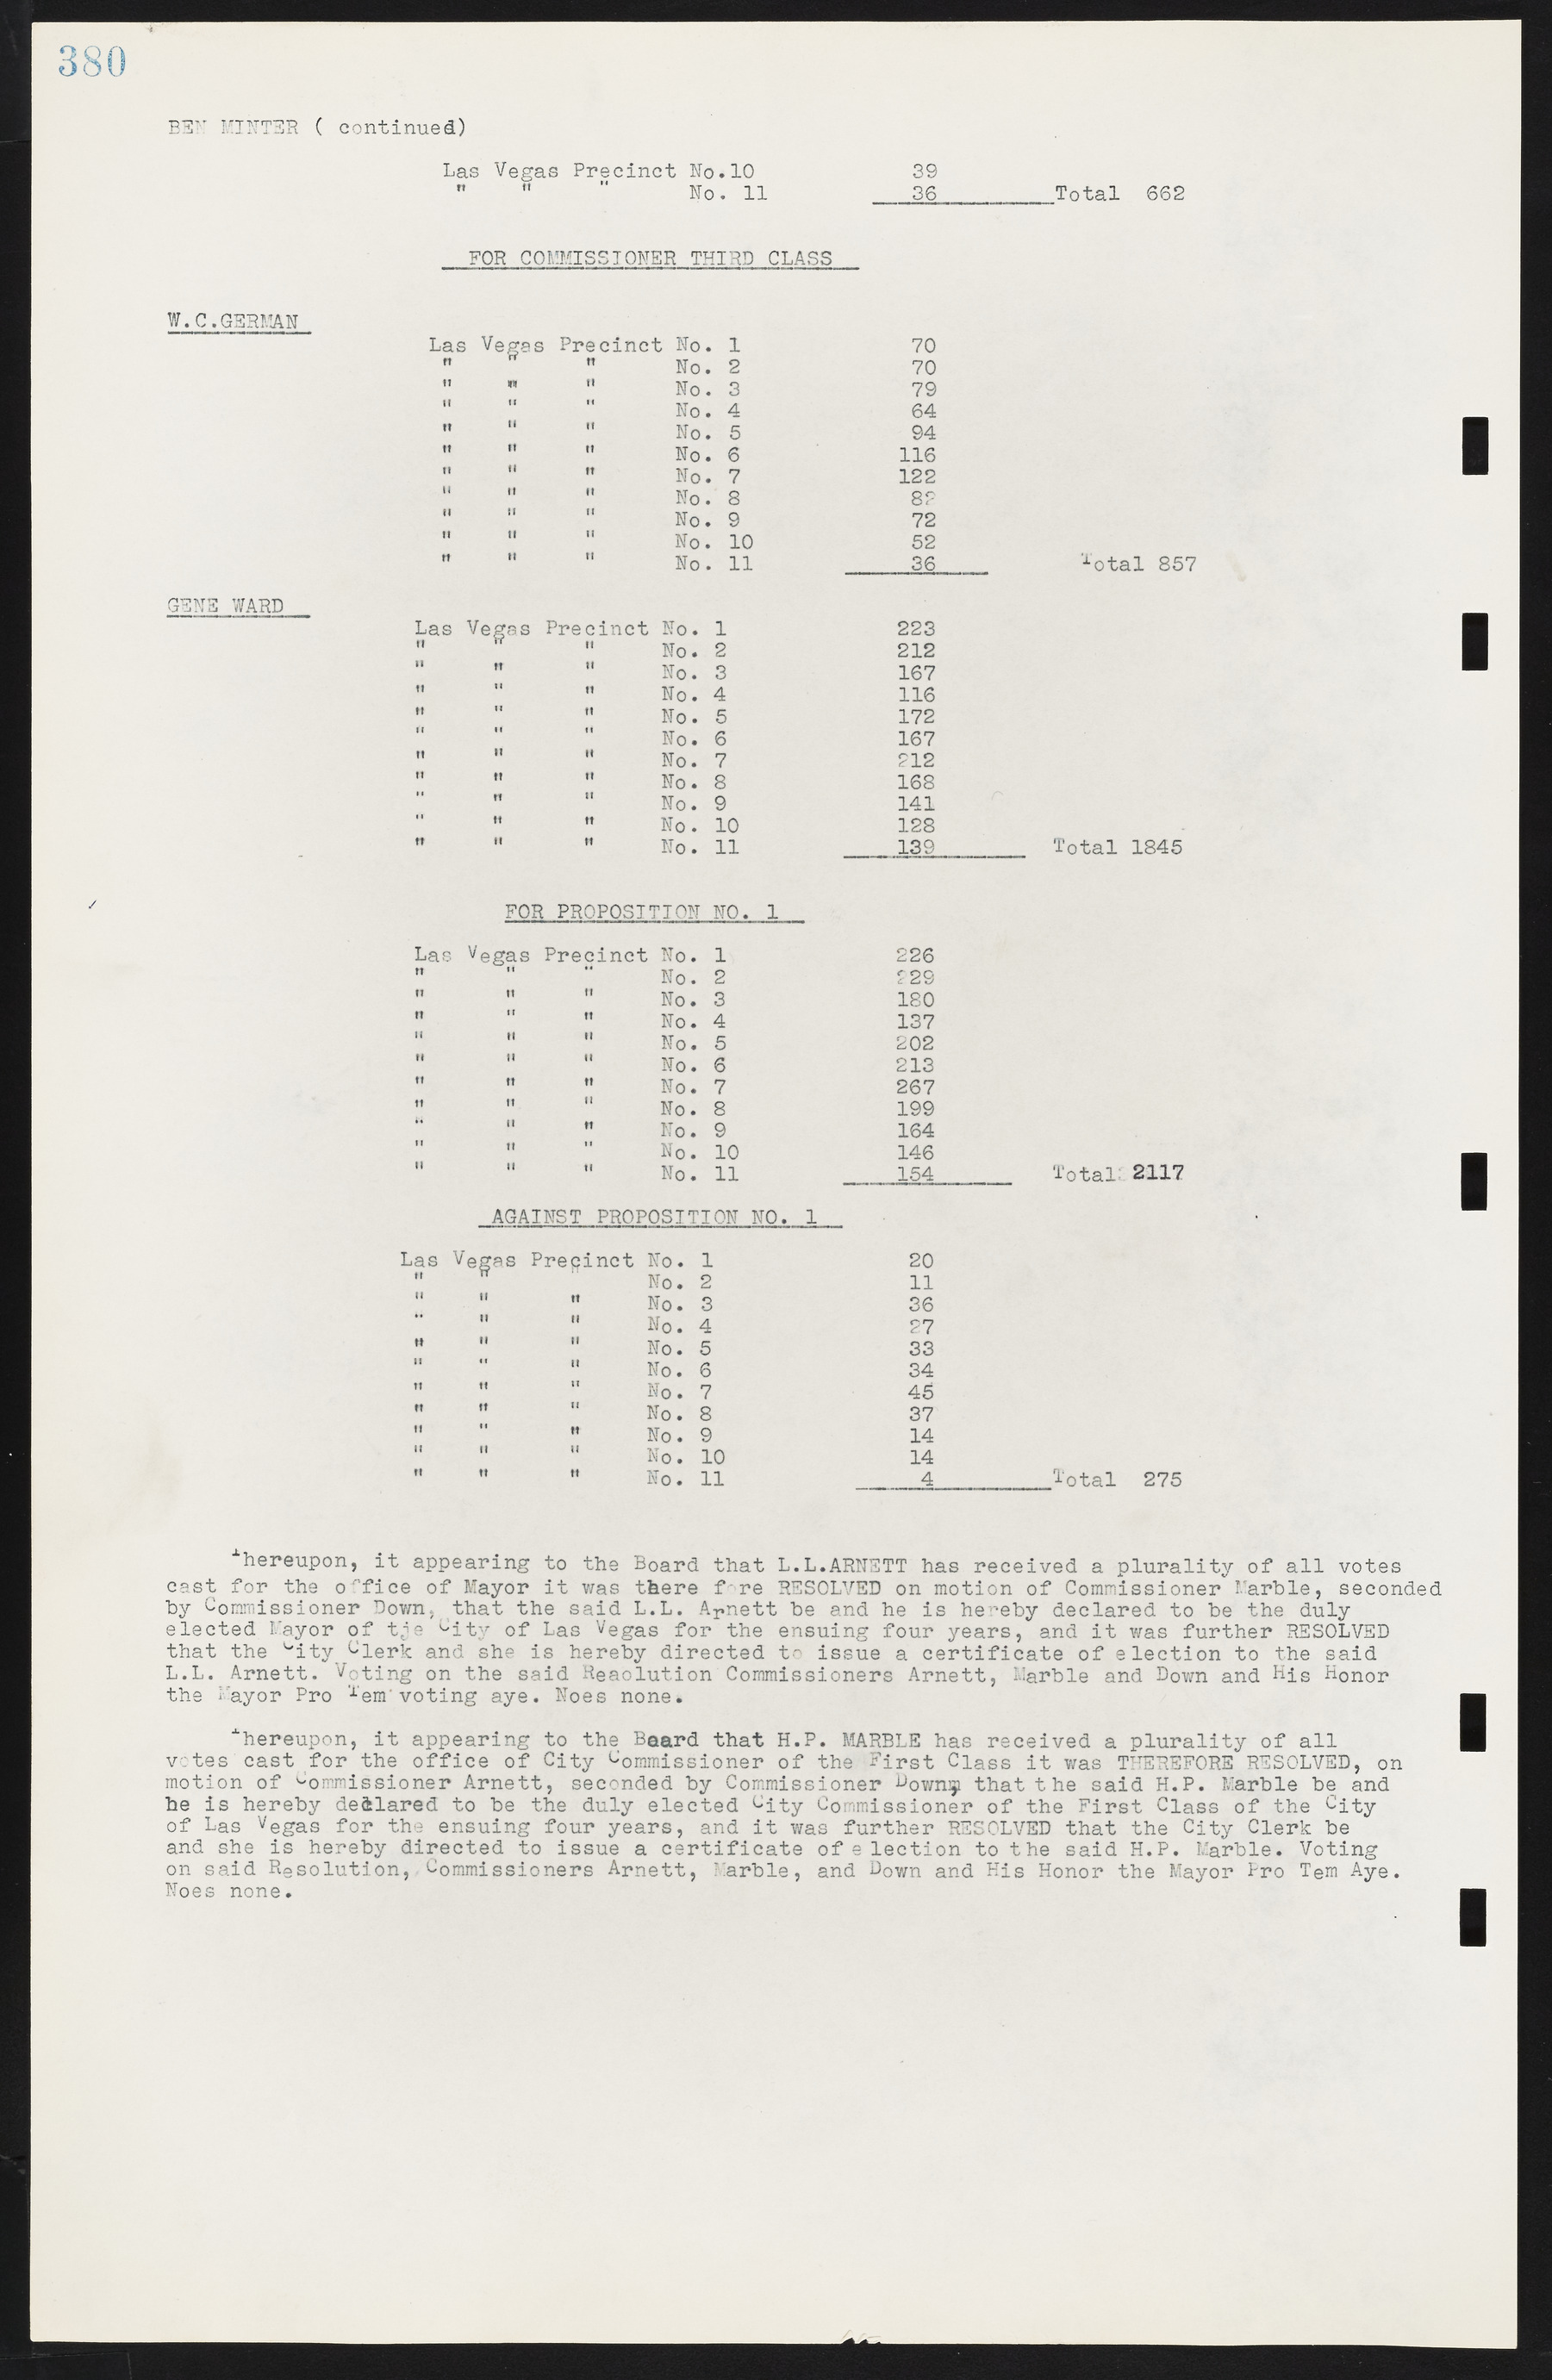 Las Vegas City Commission Minutes, May 14, 1929 to February 11, 1937, lvc000003-387